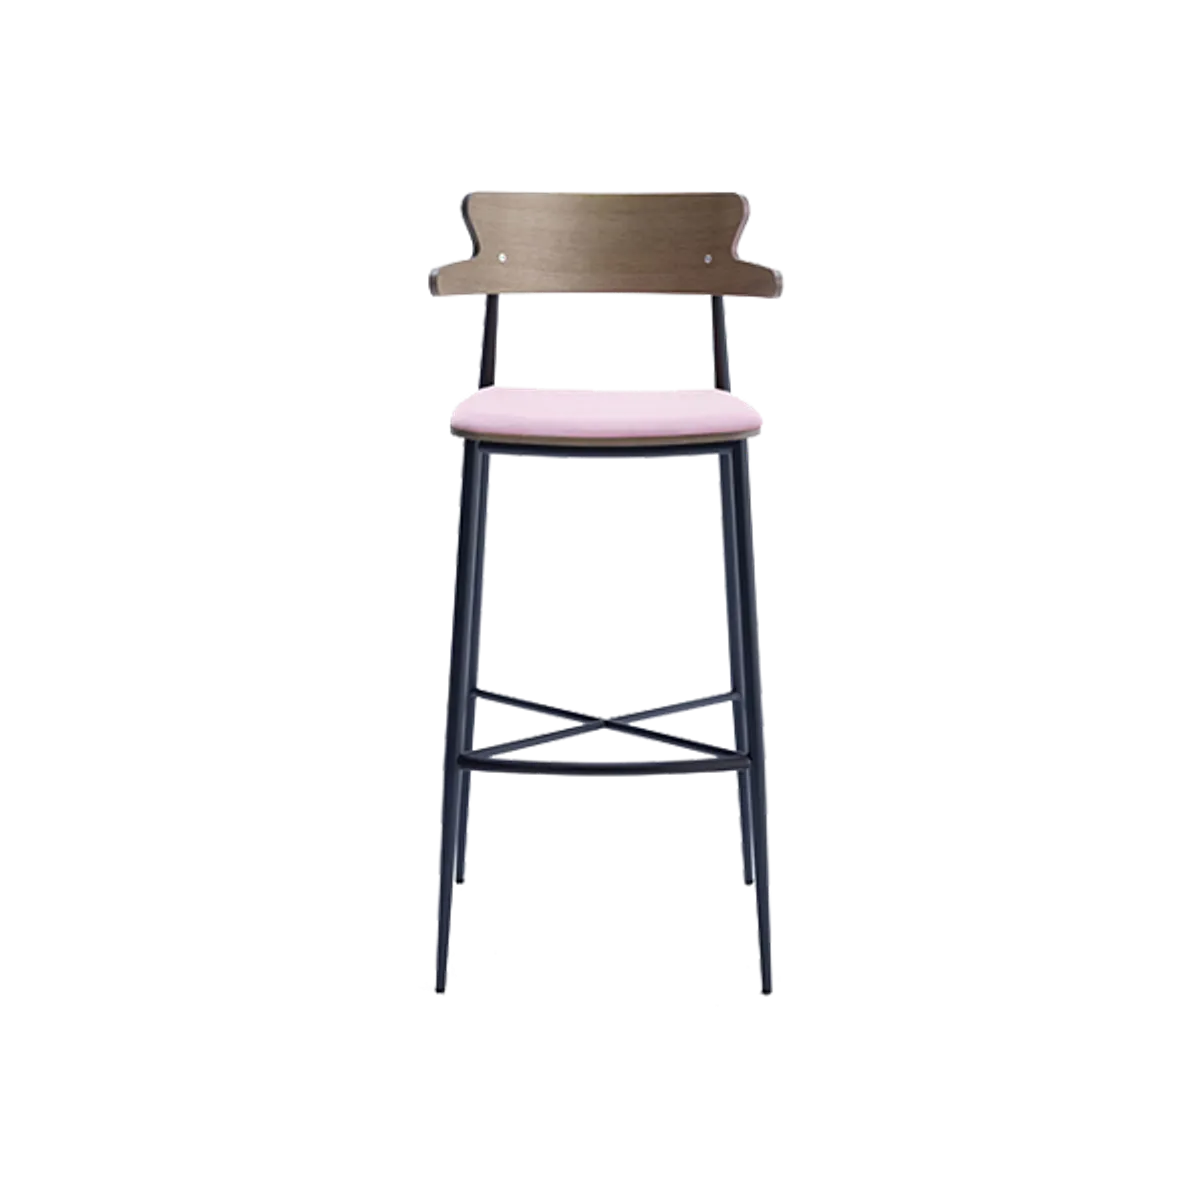 Web Brooklyn Bar Stool With Arms 01 Inside Out Contracts